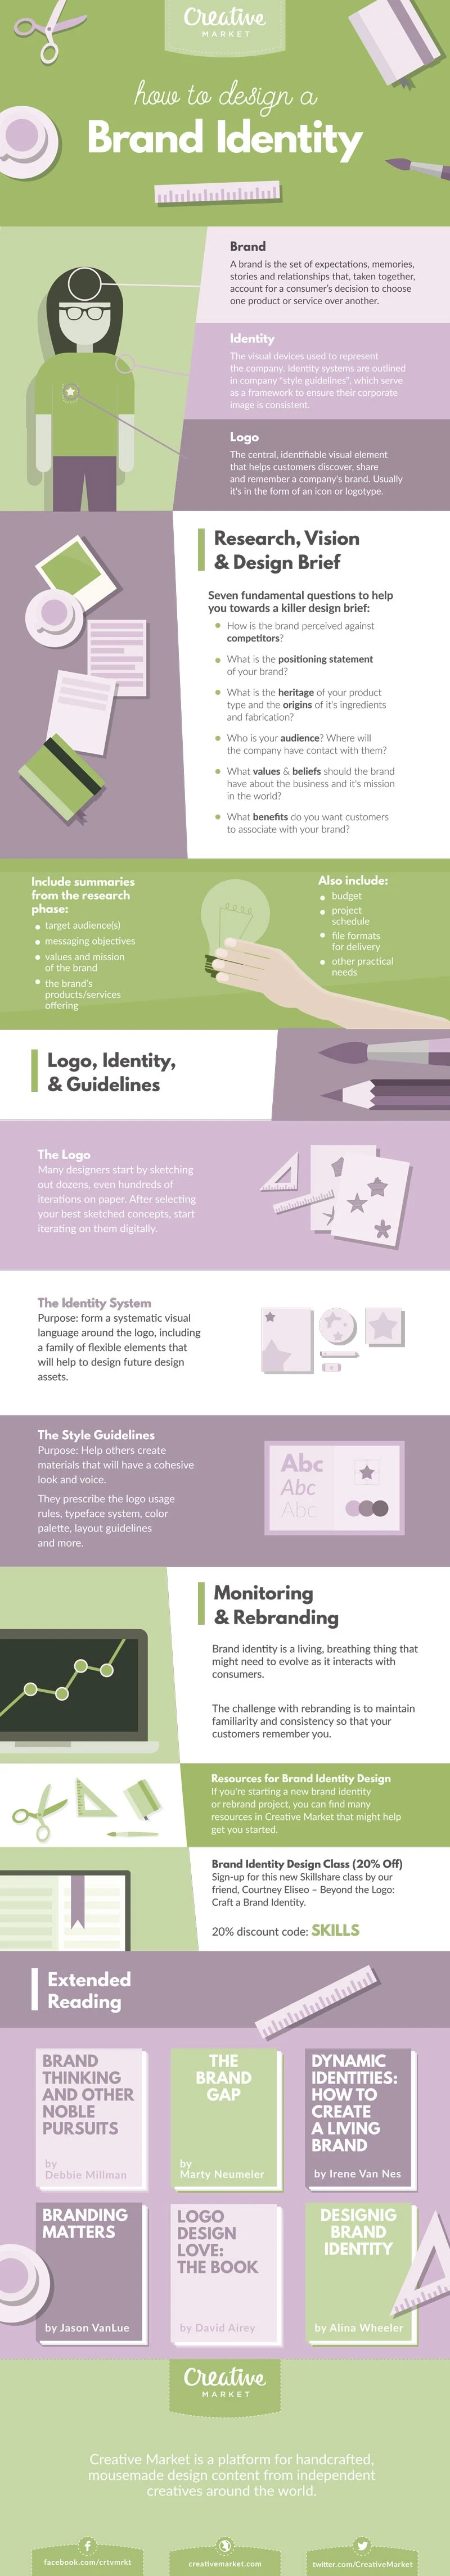 How to Design a Brand Identity - #infographic